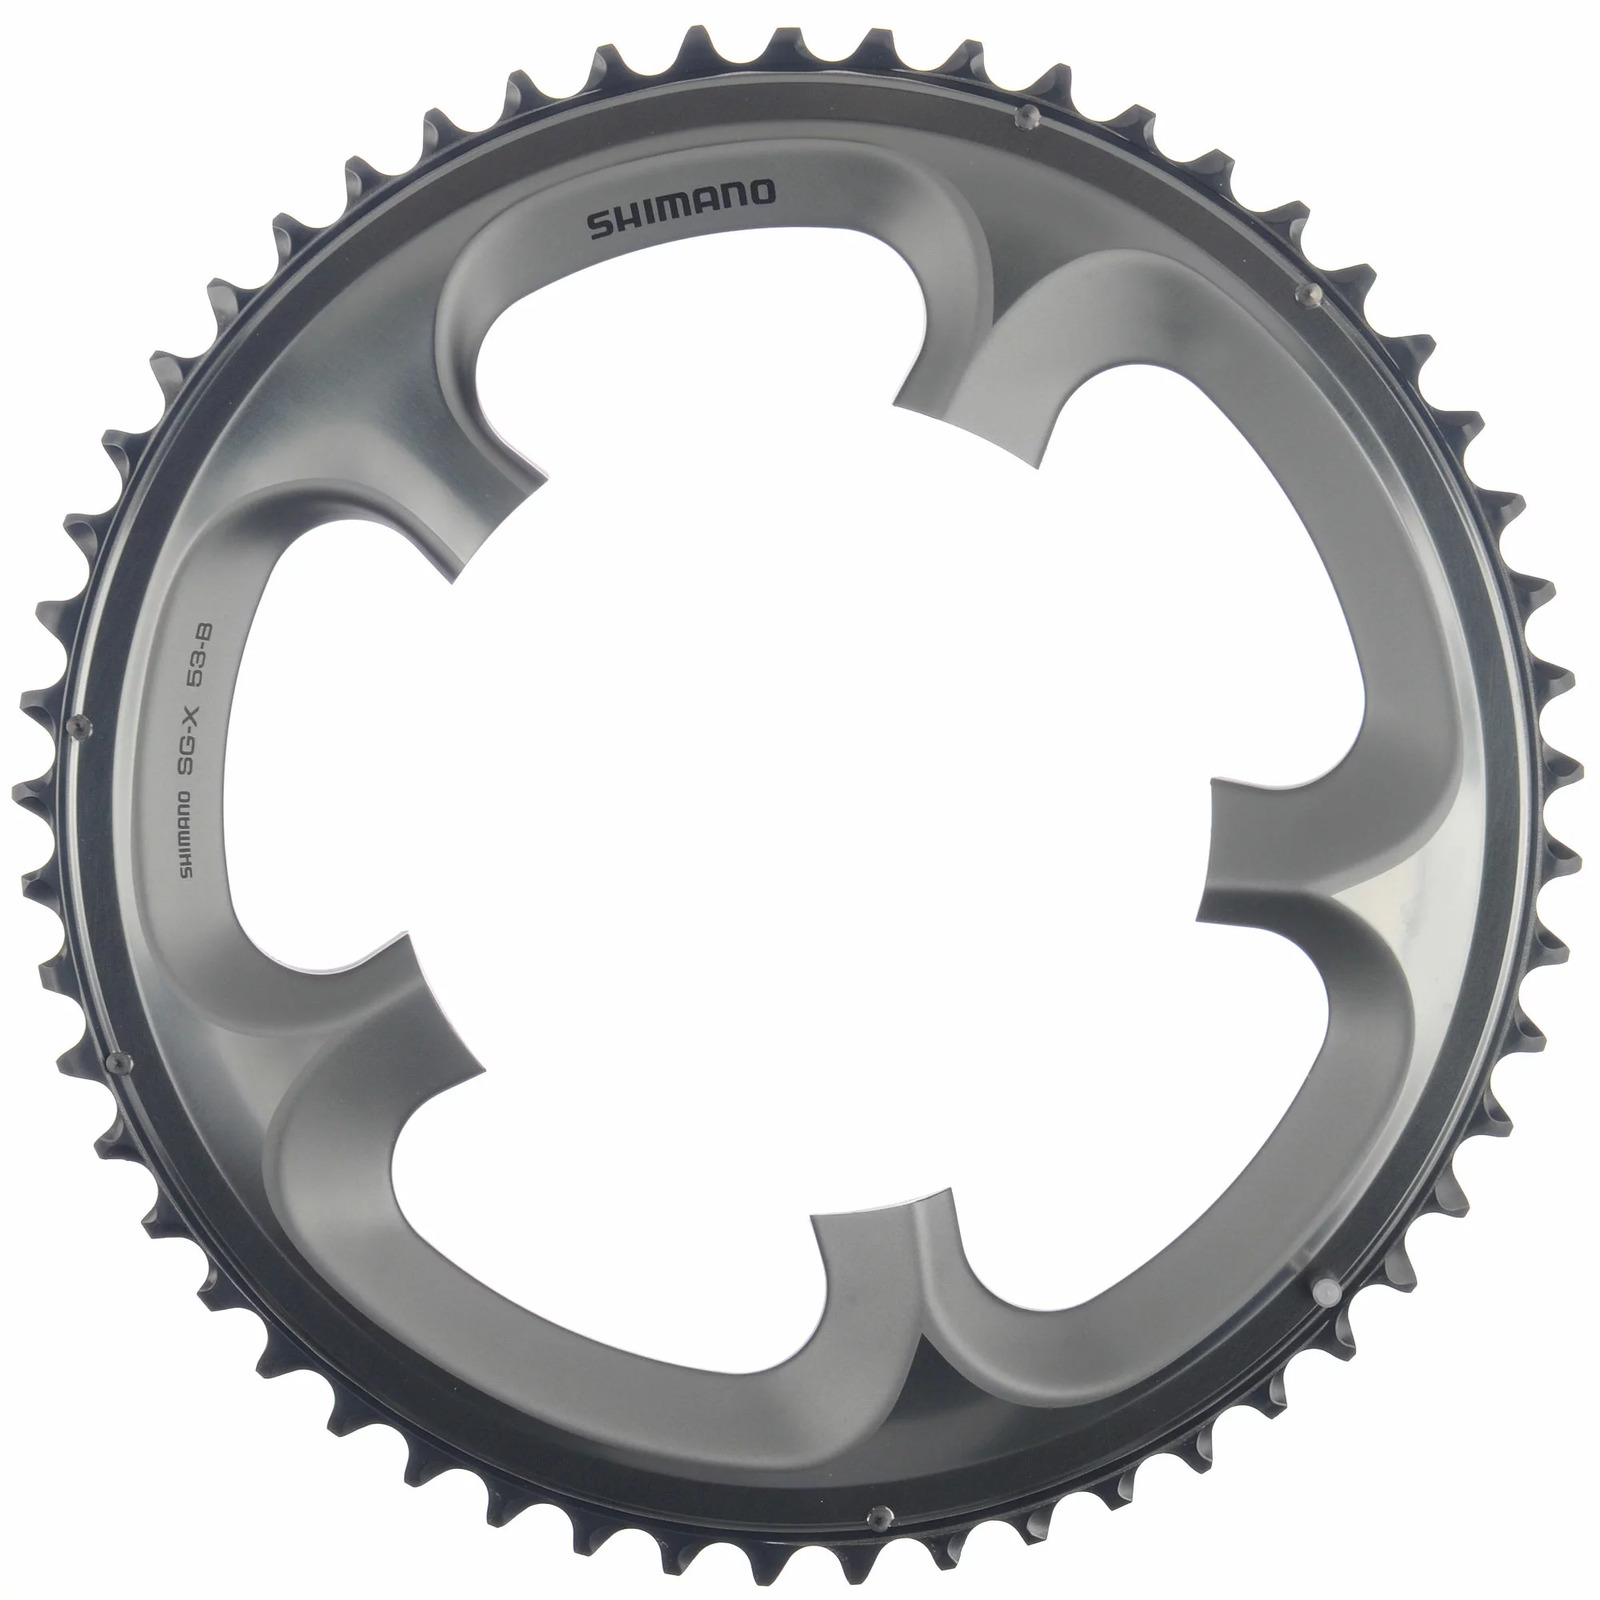 Chainring Shimano FC-6700 10-Speed 53T Ultegra Silver Chainring Shimano FC-6700 10-Speed 53T Ultegra Silver